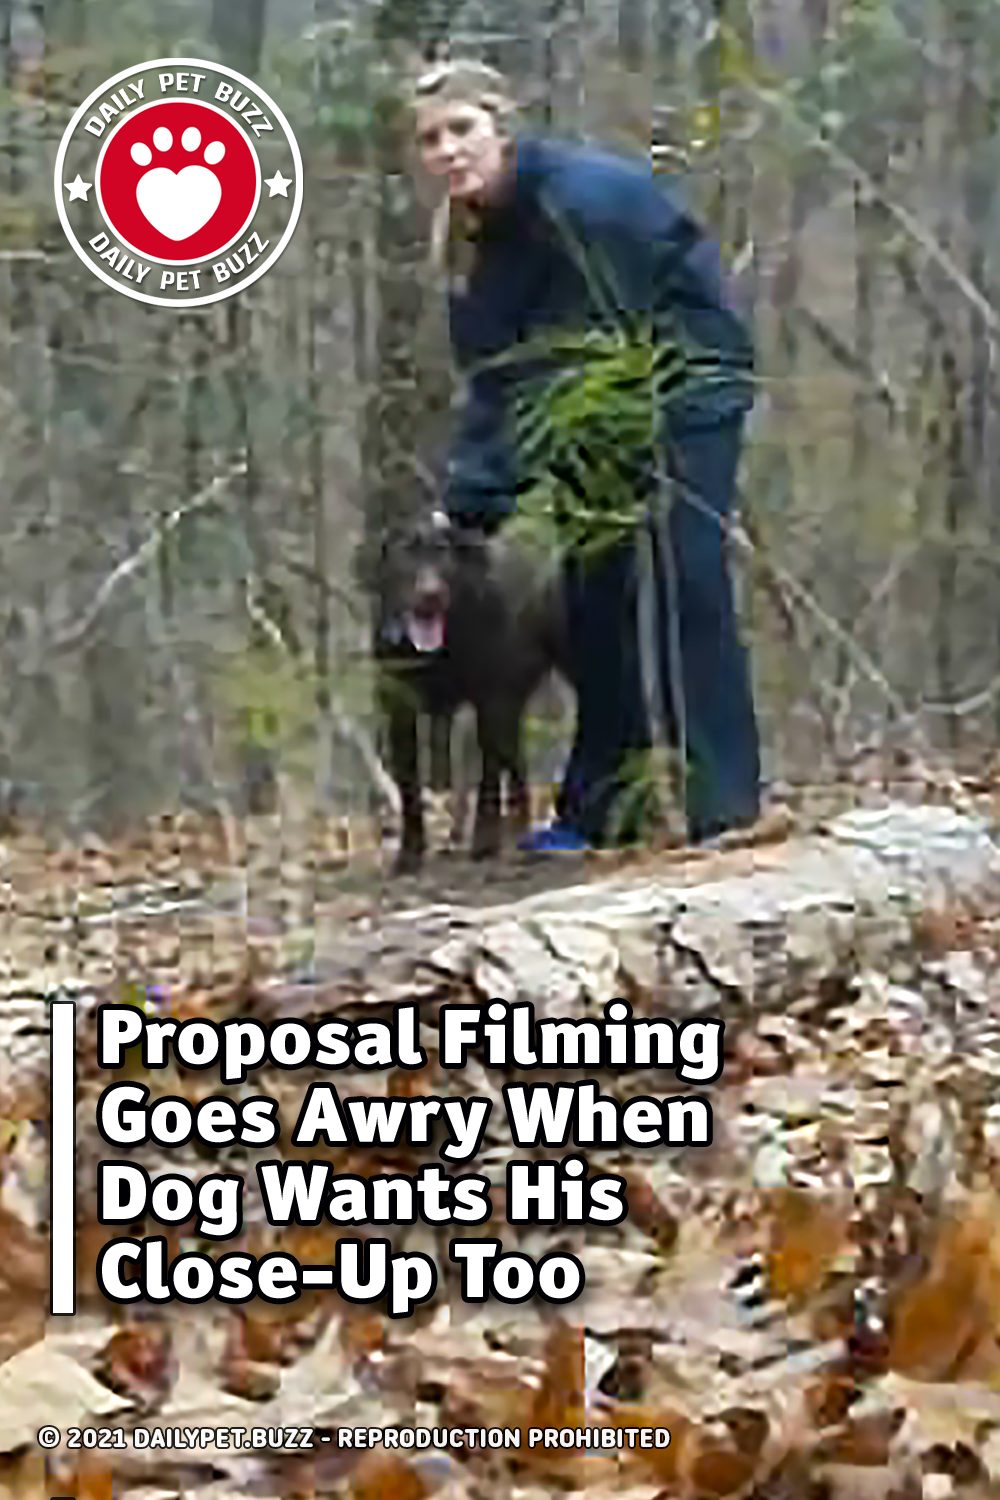 Proposal Filming Goes Awry When Dog Wants His Close-Up Too